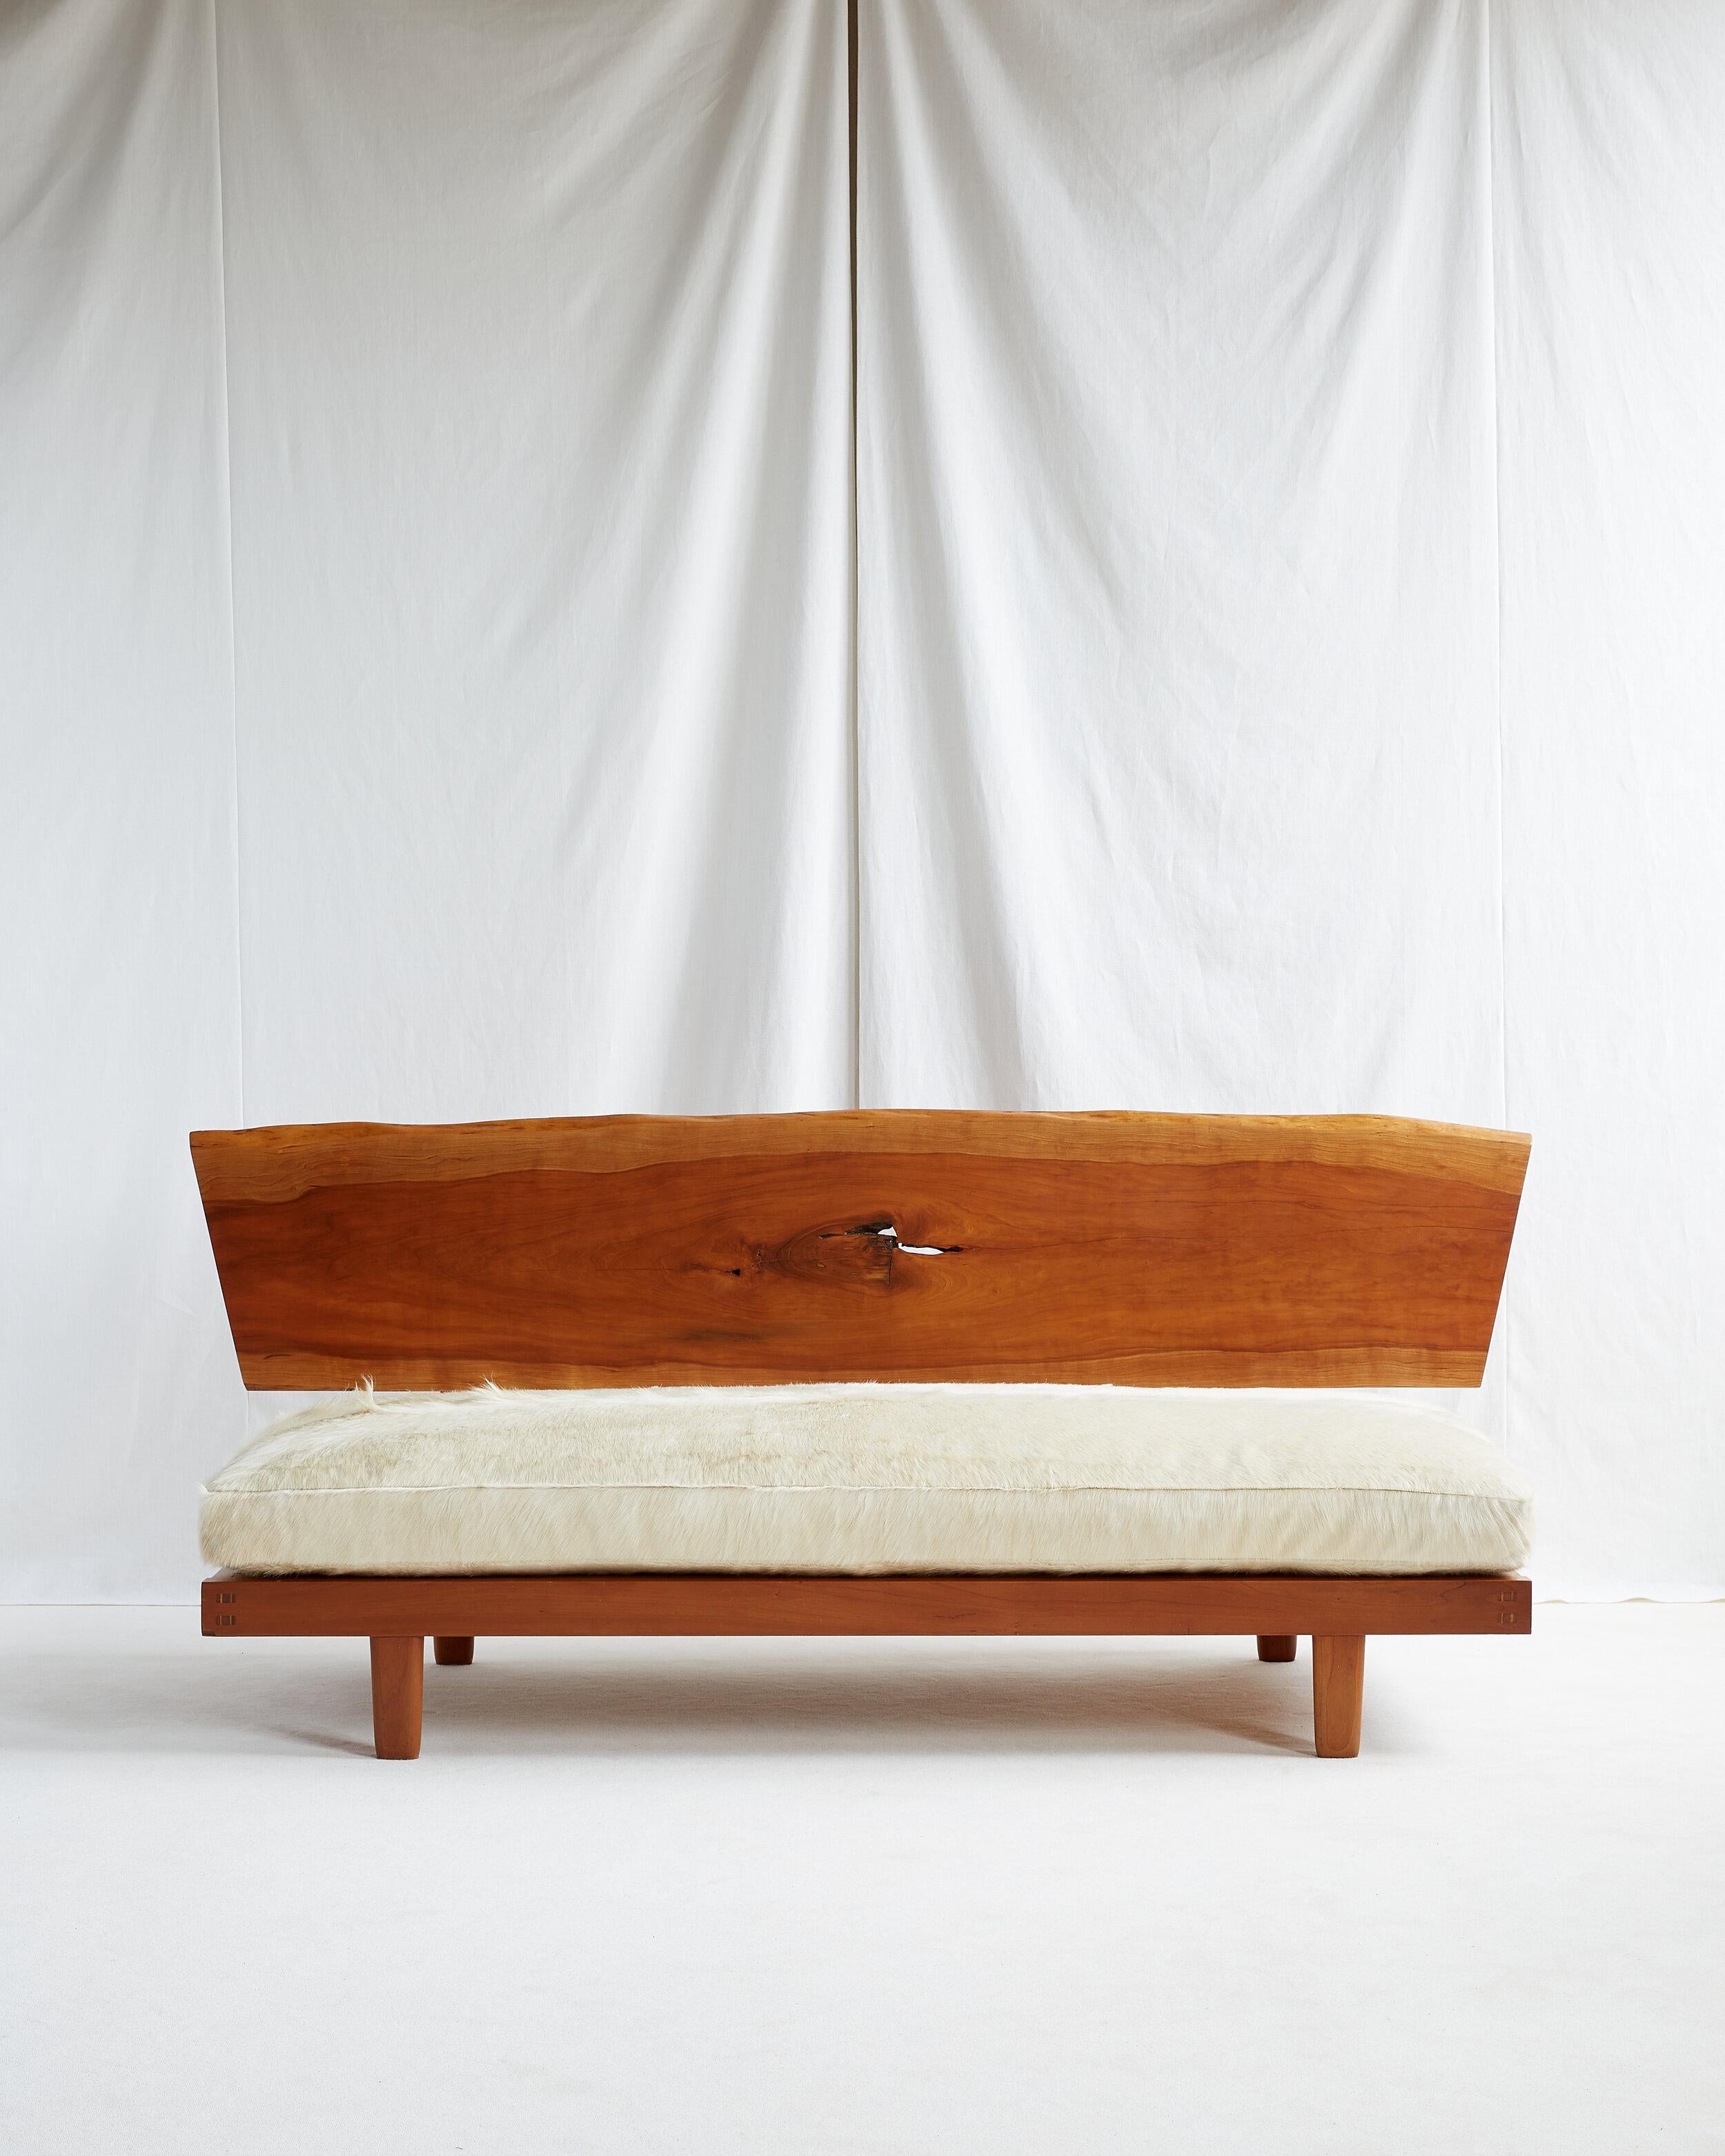 Beautiful freeform single board cherry slab back with sap grain and one central knot. 

Solid cherry frame with ovoid legs. Seat cushion upholstered with ivory Brazilian long hair cow hide, feather and down wrapped over foam. 

American c. 1964.